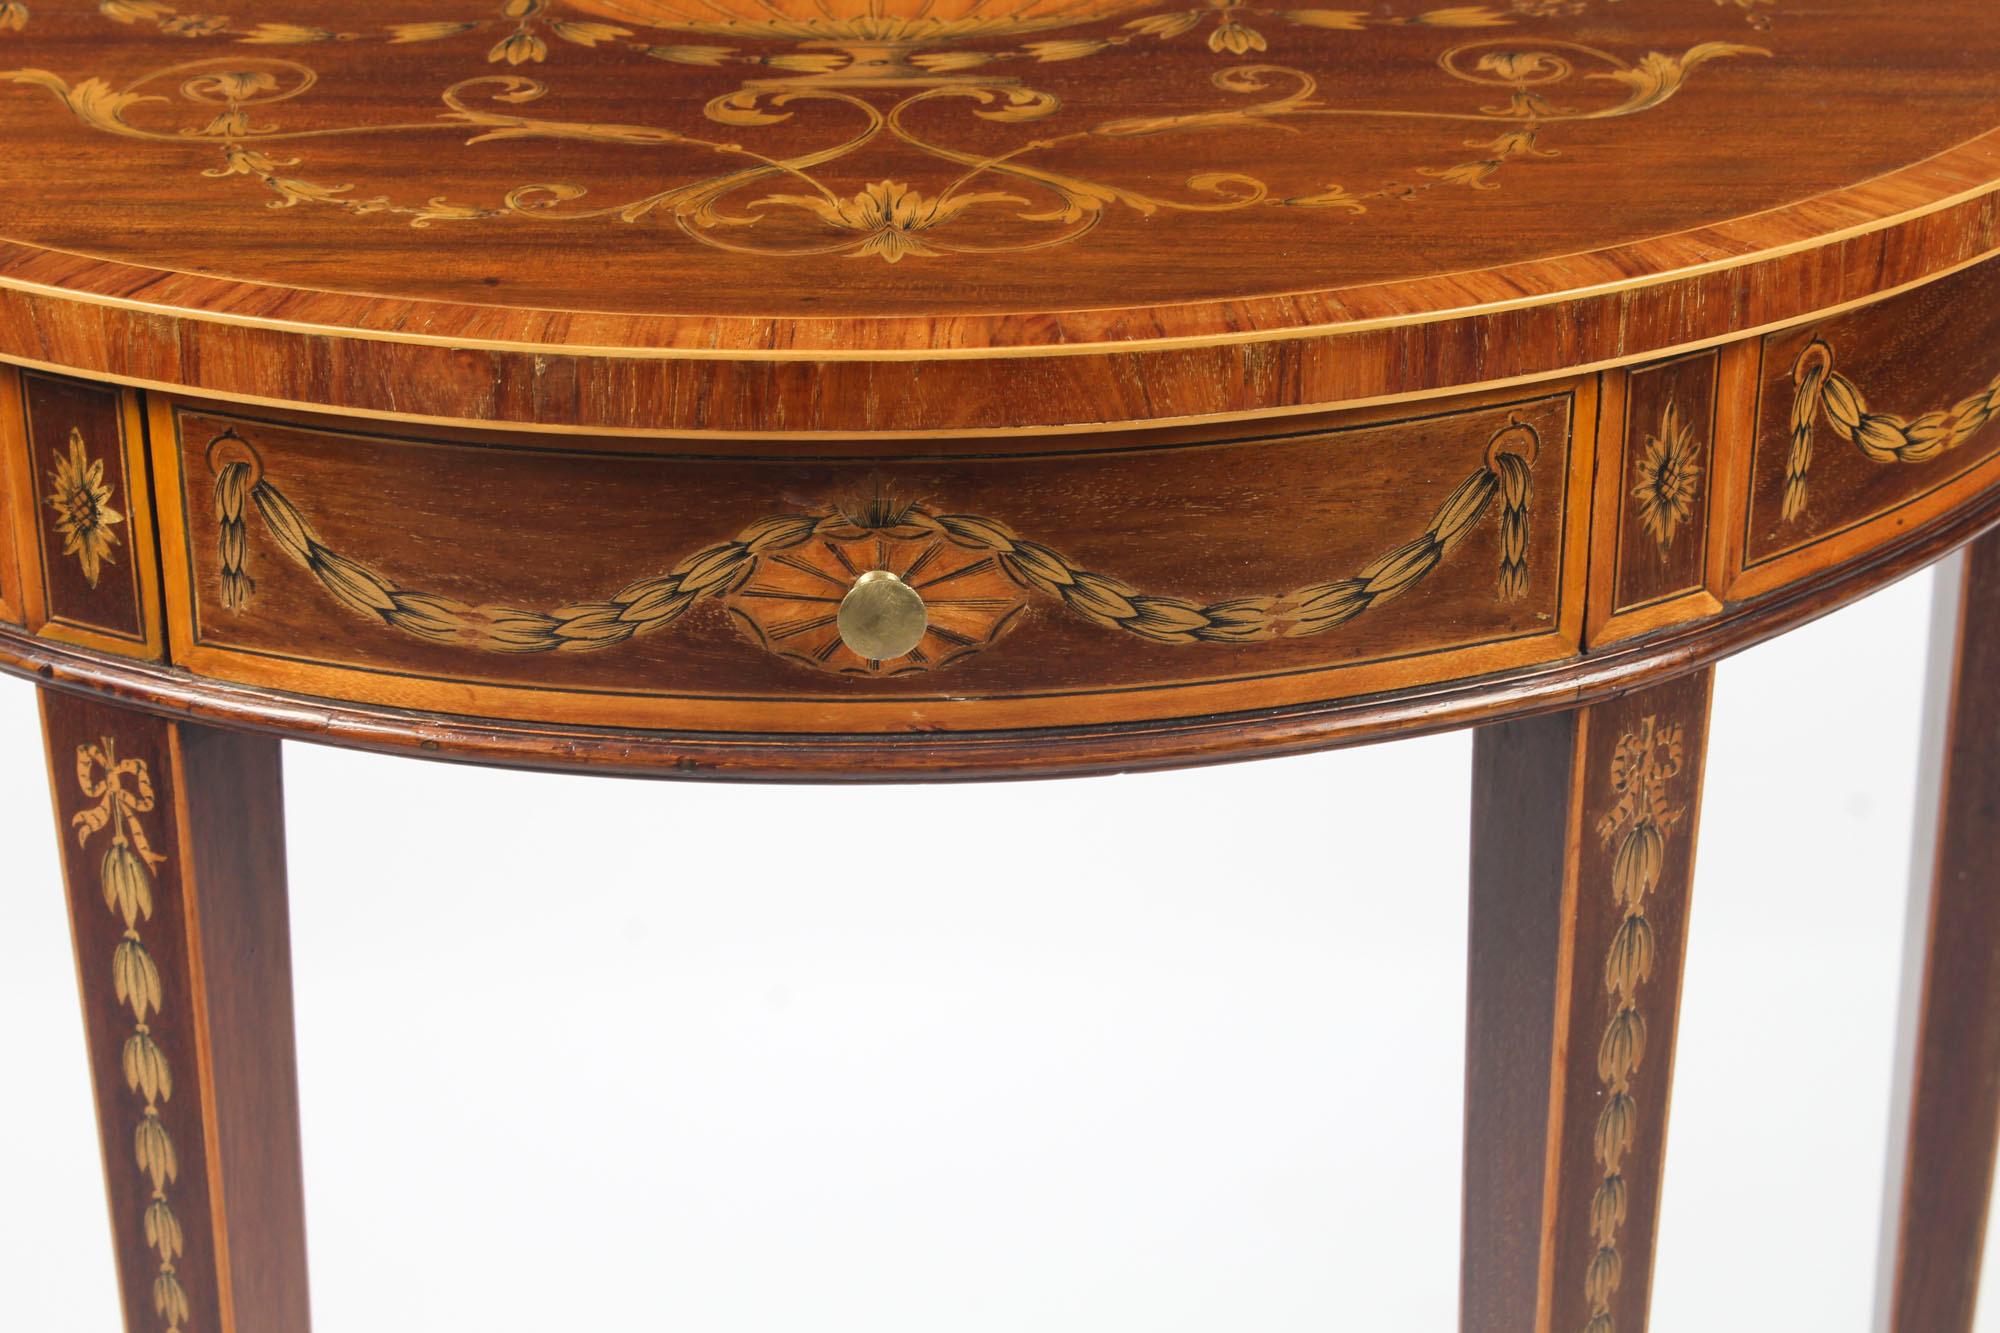 Early 20th Century Antique Regency Revival Marquetry Console Table, 19th Century